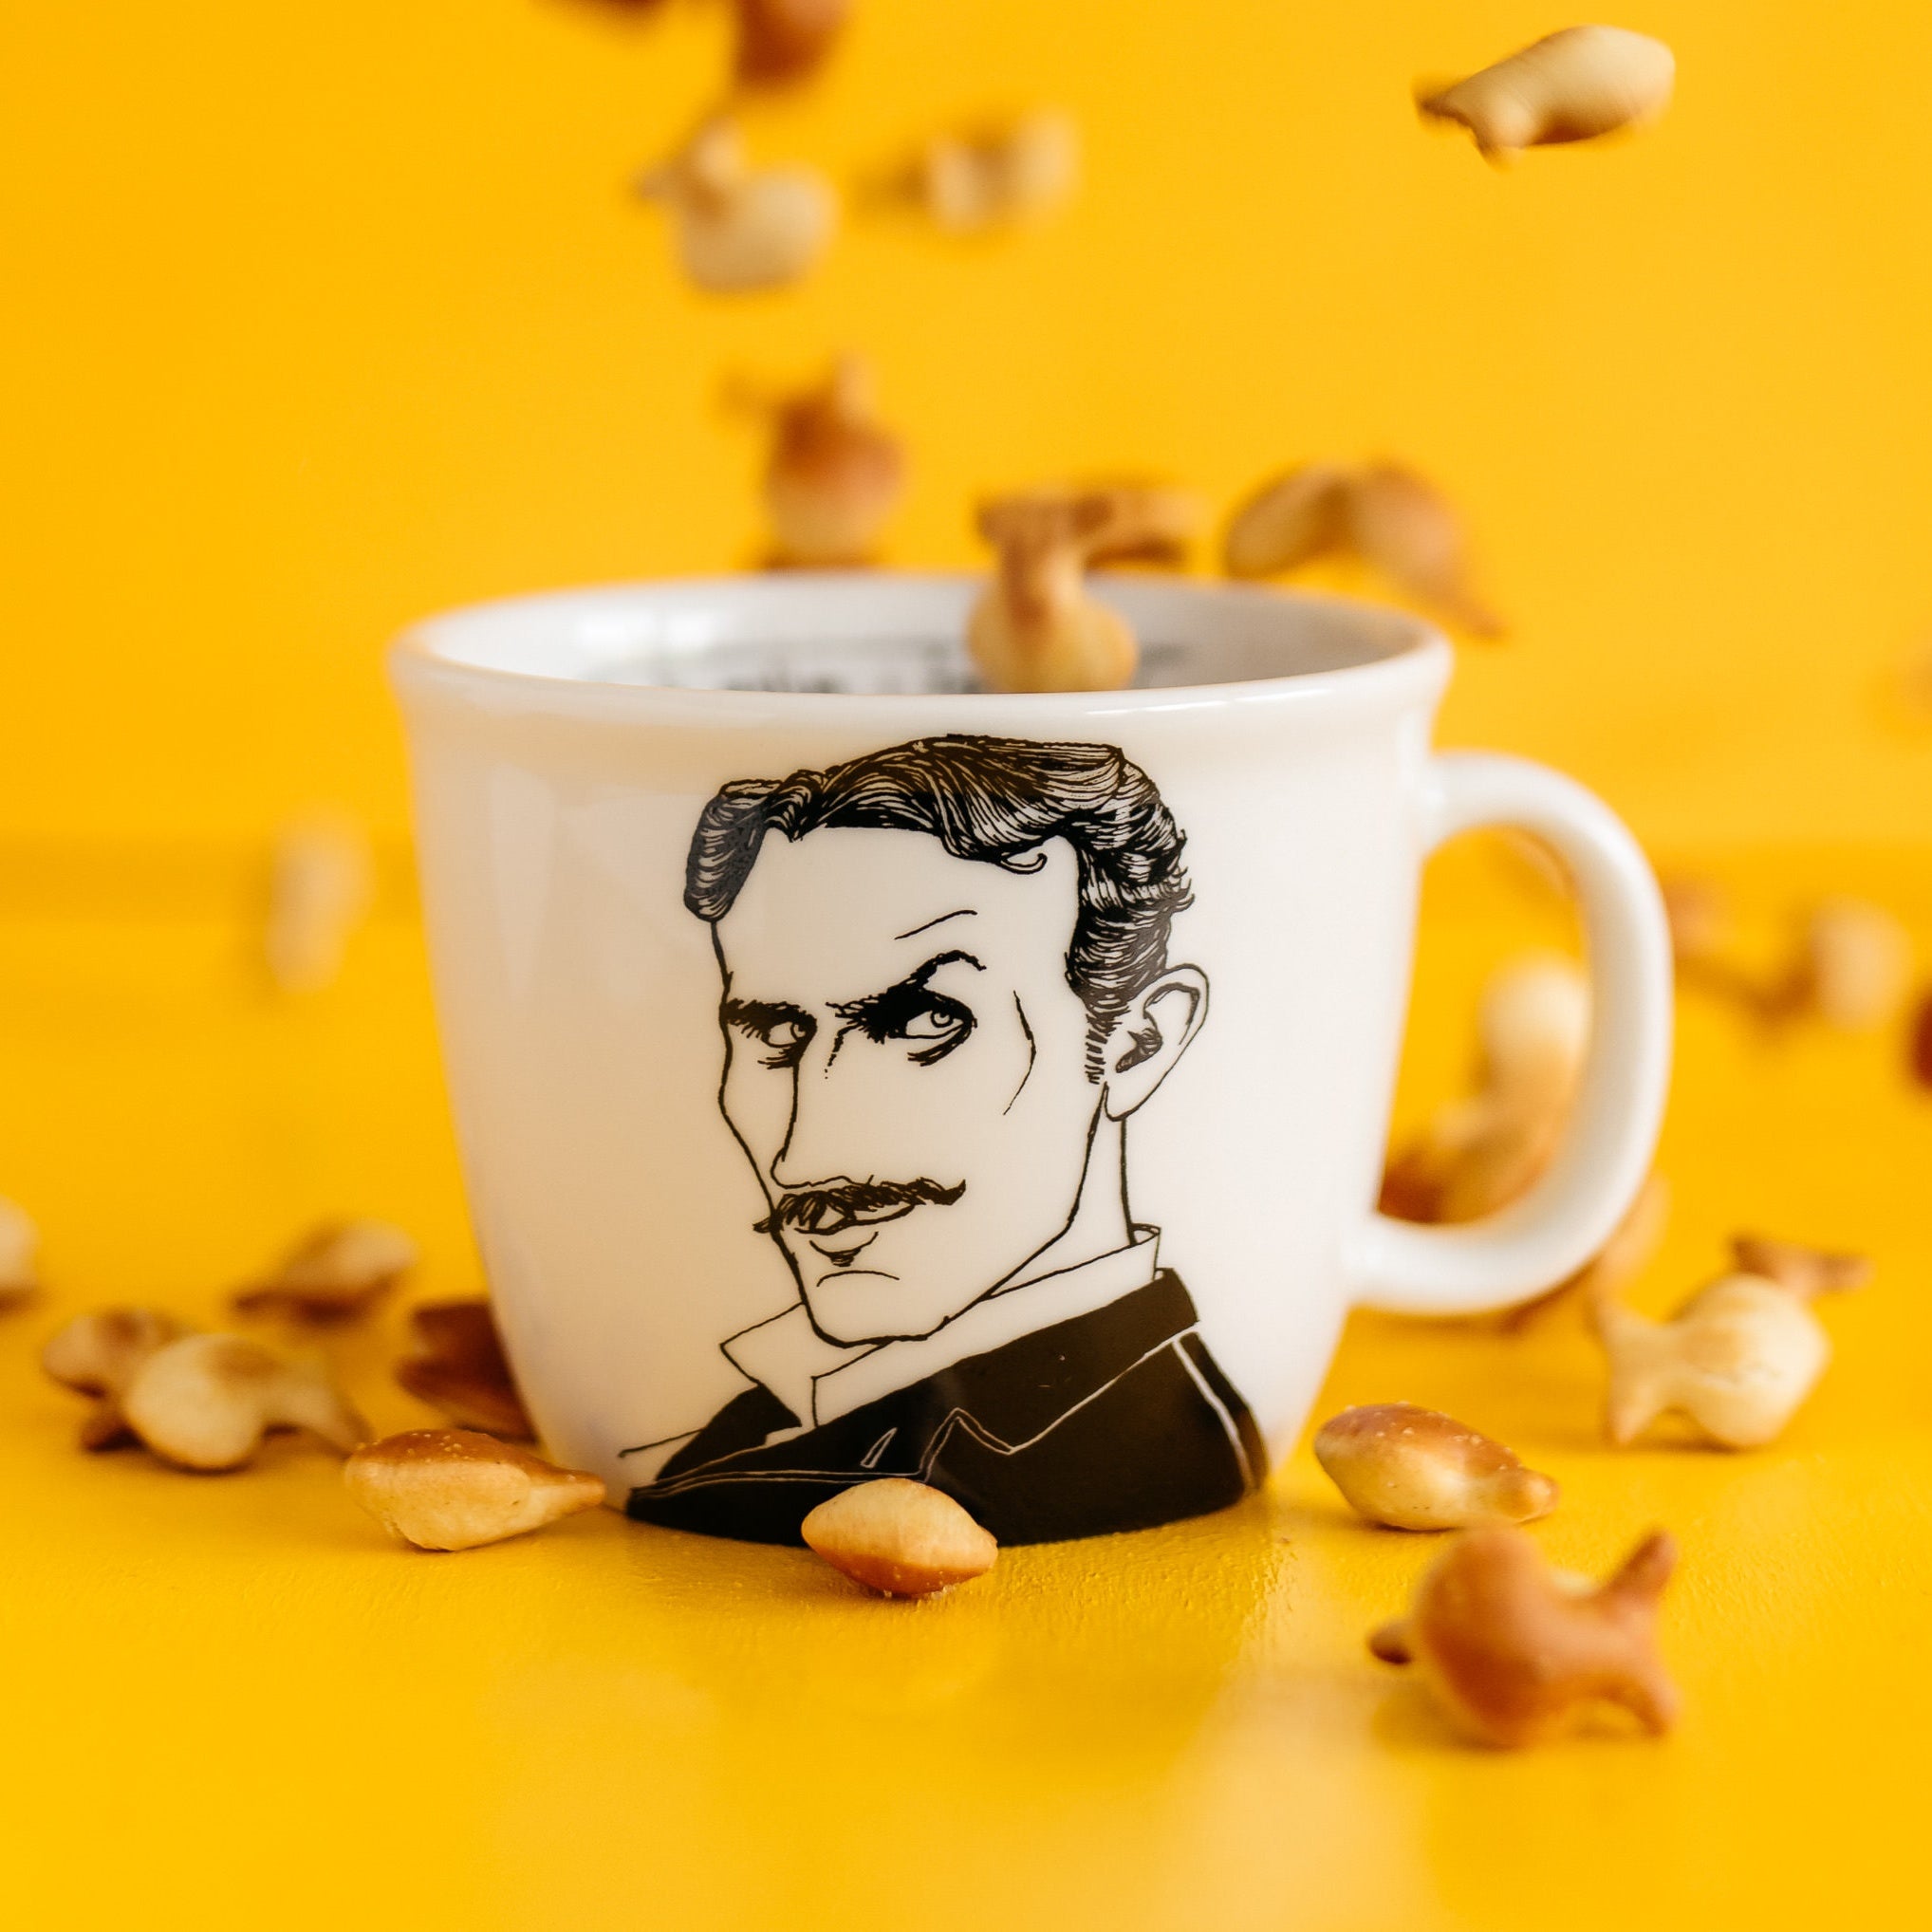 Porcelain cup inspired by Nikola Tesla with goldfish